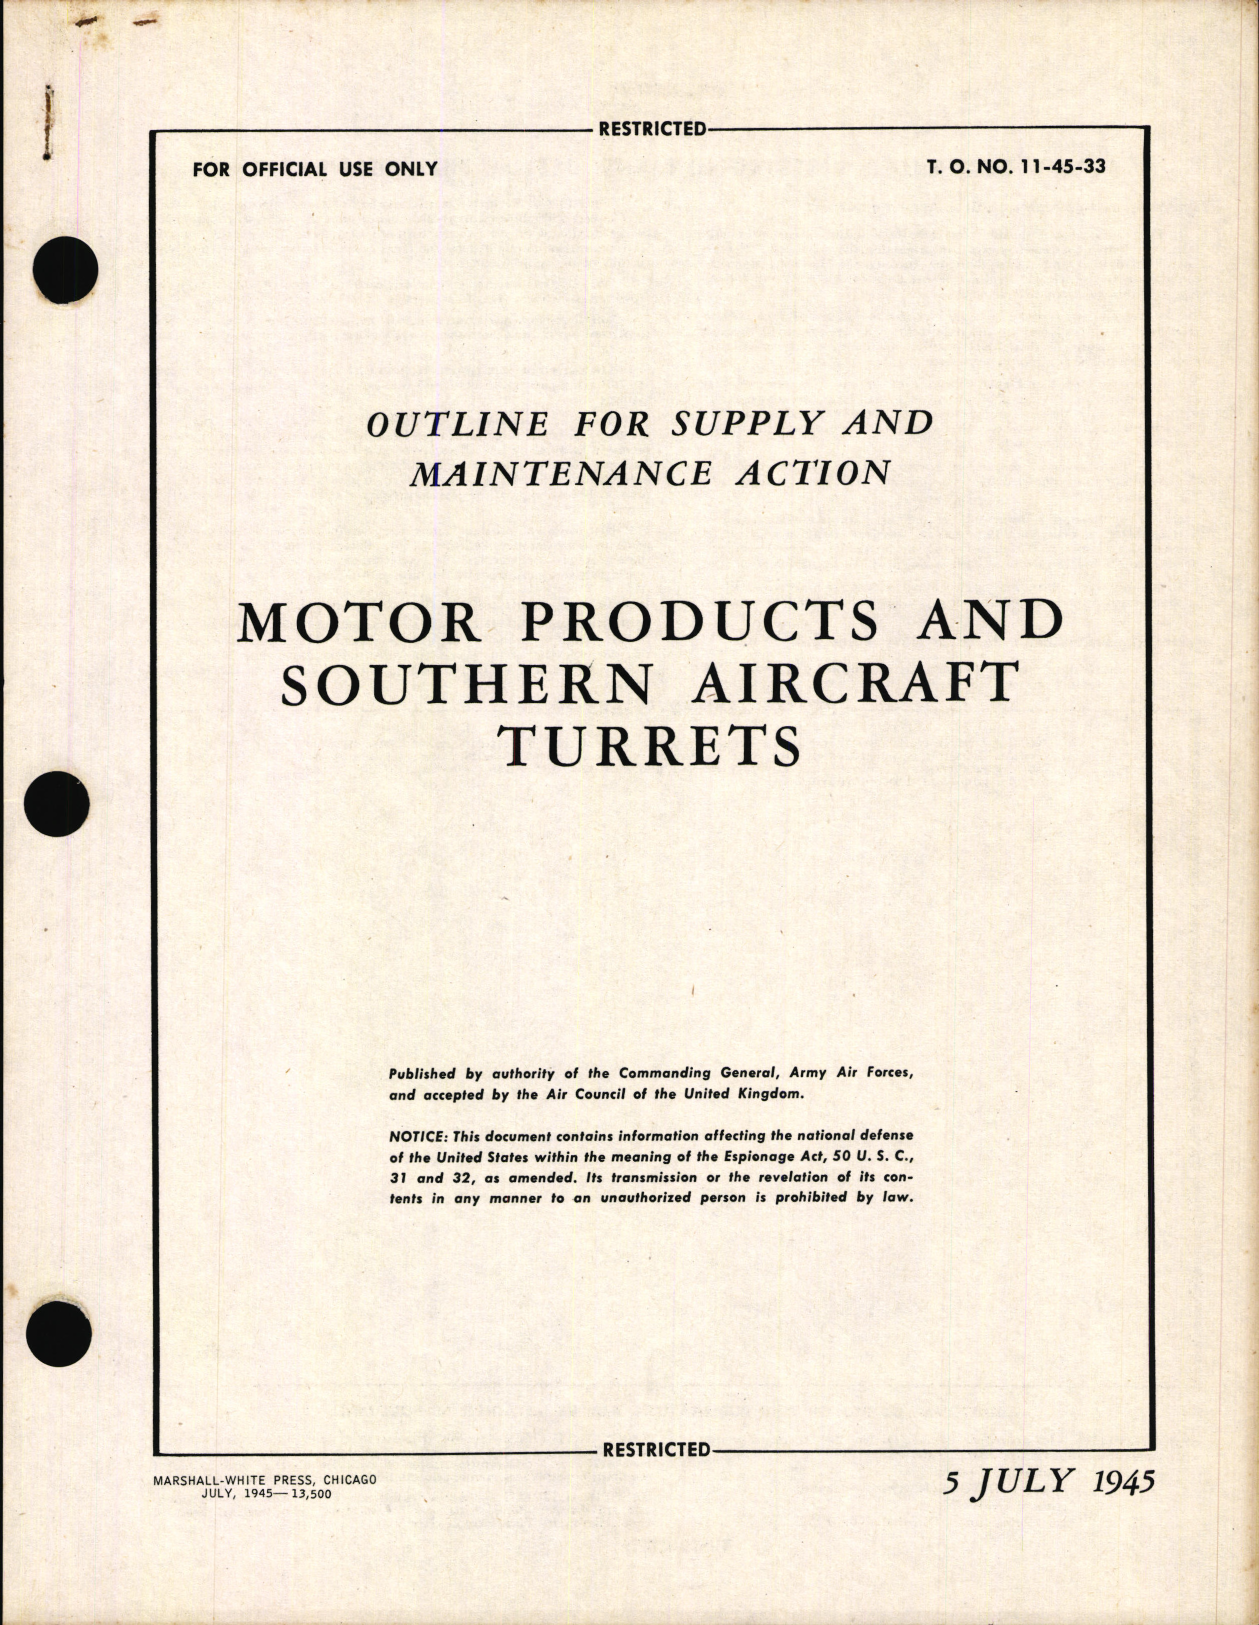 Sample page 1 from AirCorps Library document: Outline for Supply and Maintenance Action for Motor Products and Southern Aircraft Turrets